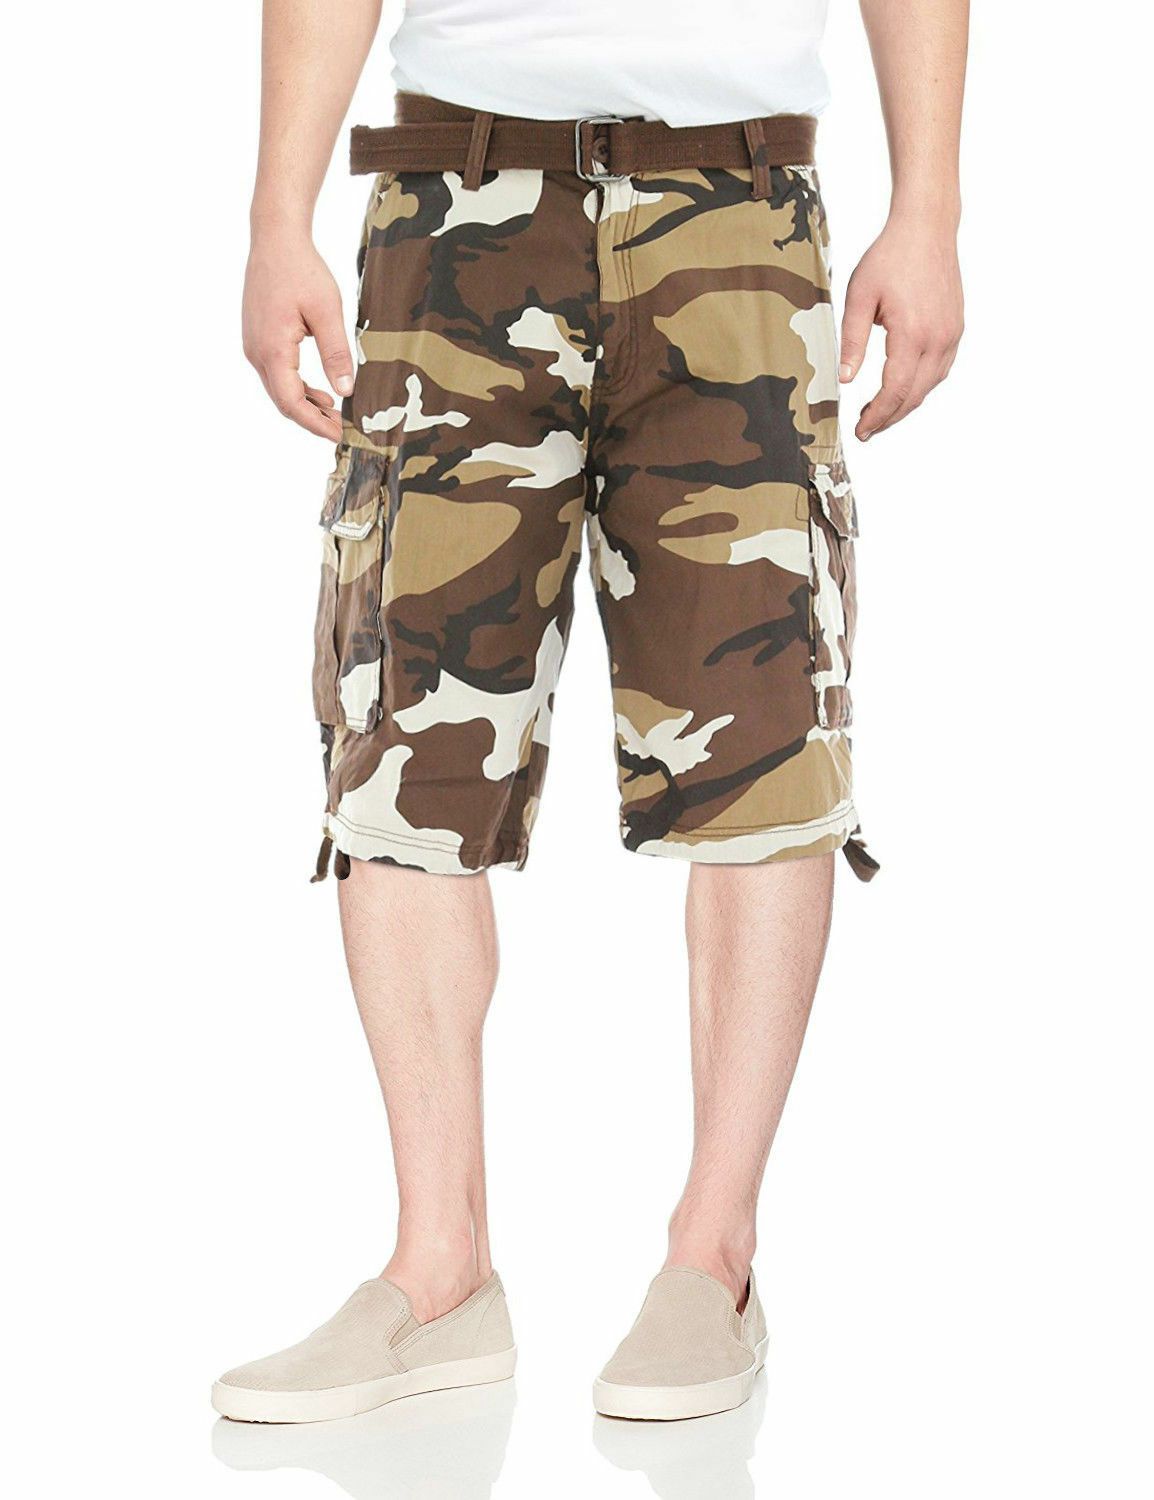 Premium Mens Camouflage Tactical Cargo Shorts - Westfield Retailers